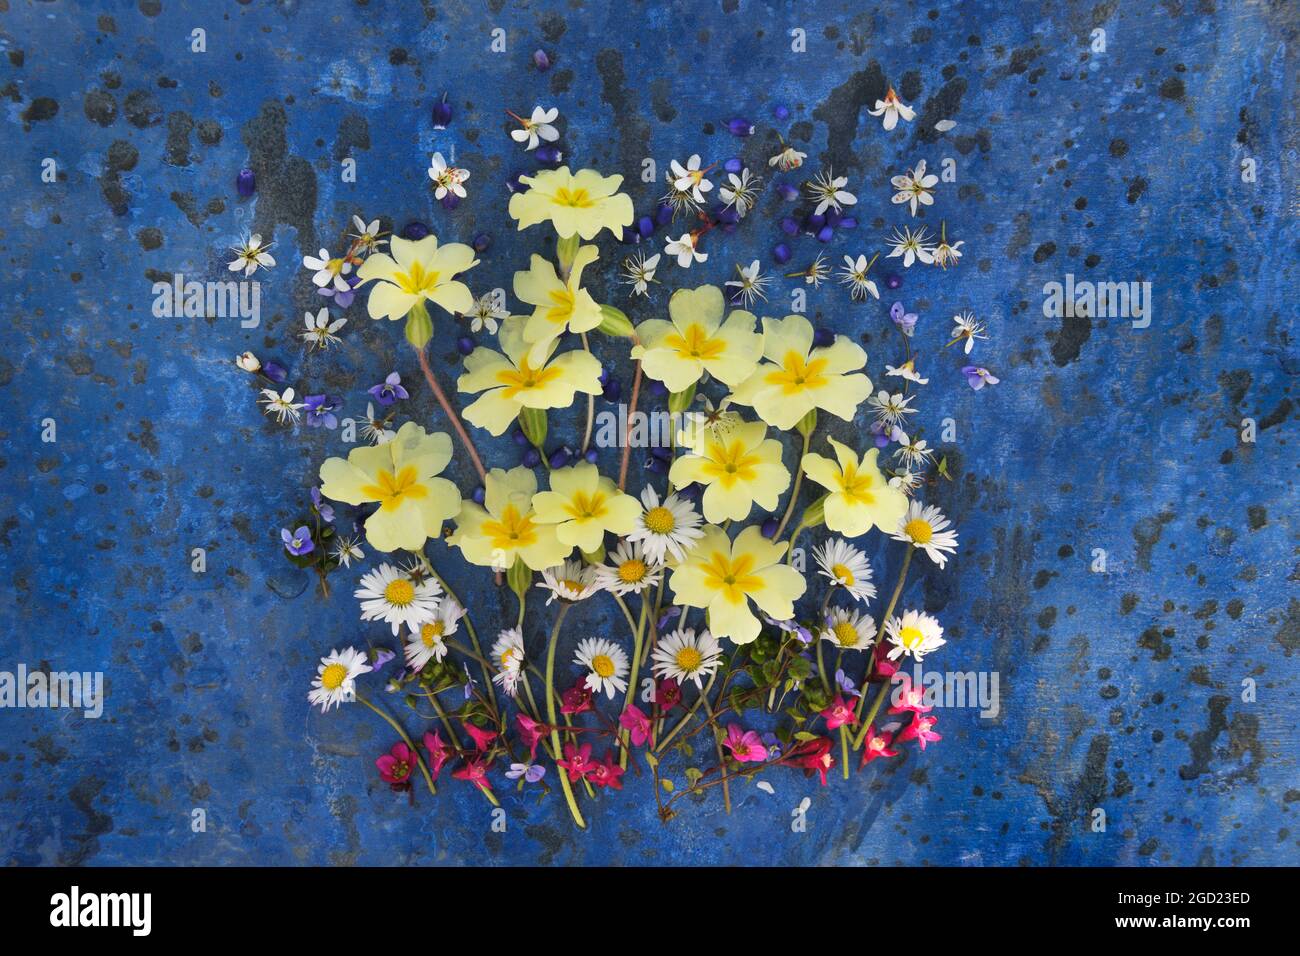 Arrangement of primrose flowers on painted blue background, with pink sedum, white daisy, and blackthorn flowers. Stock Photo